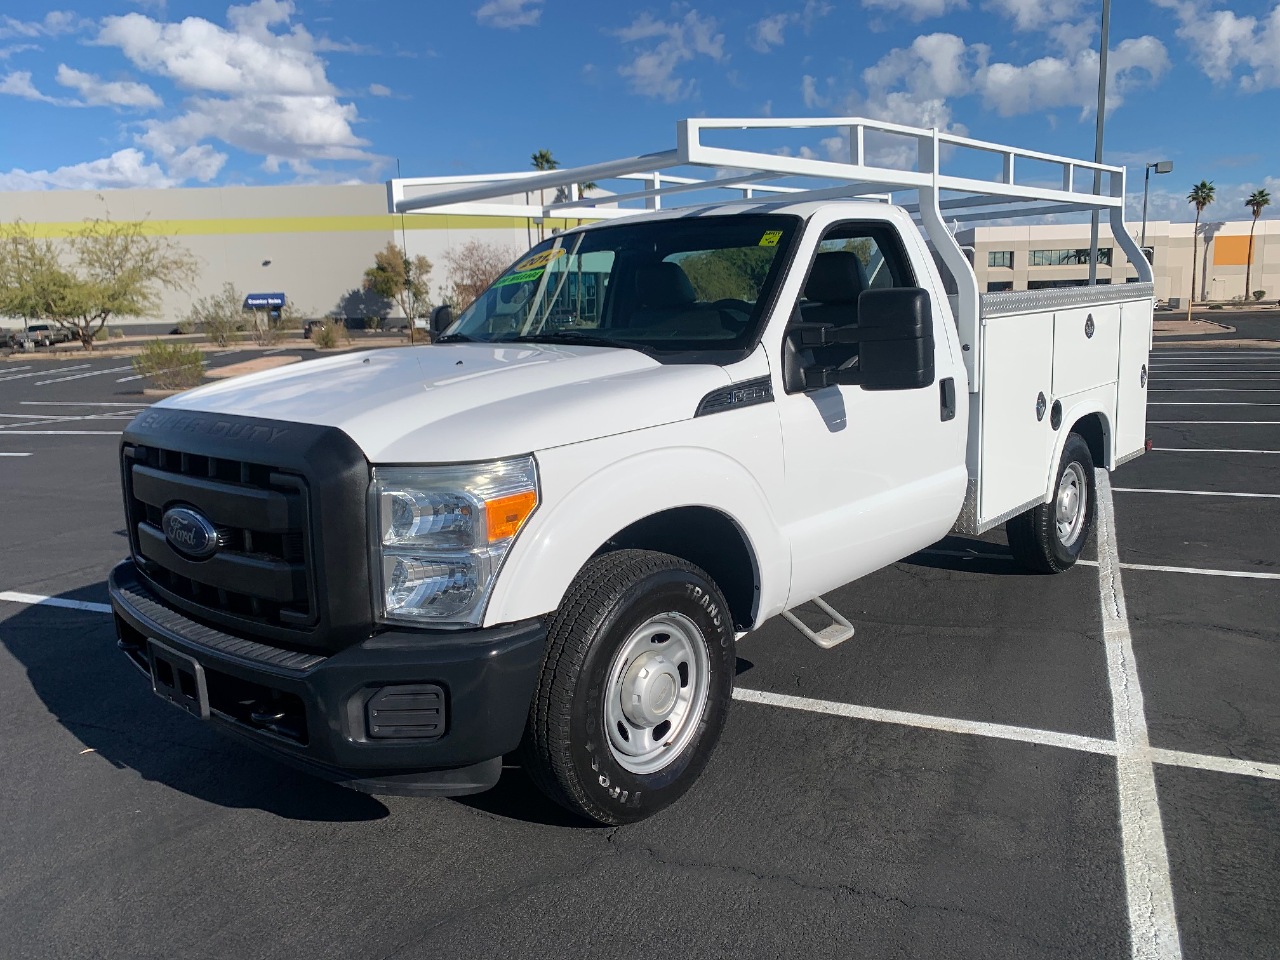 USED 2013 FORD F350 SRW SERVICE - UTILITY TRUCK #3243